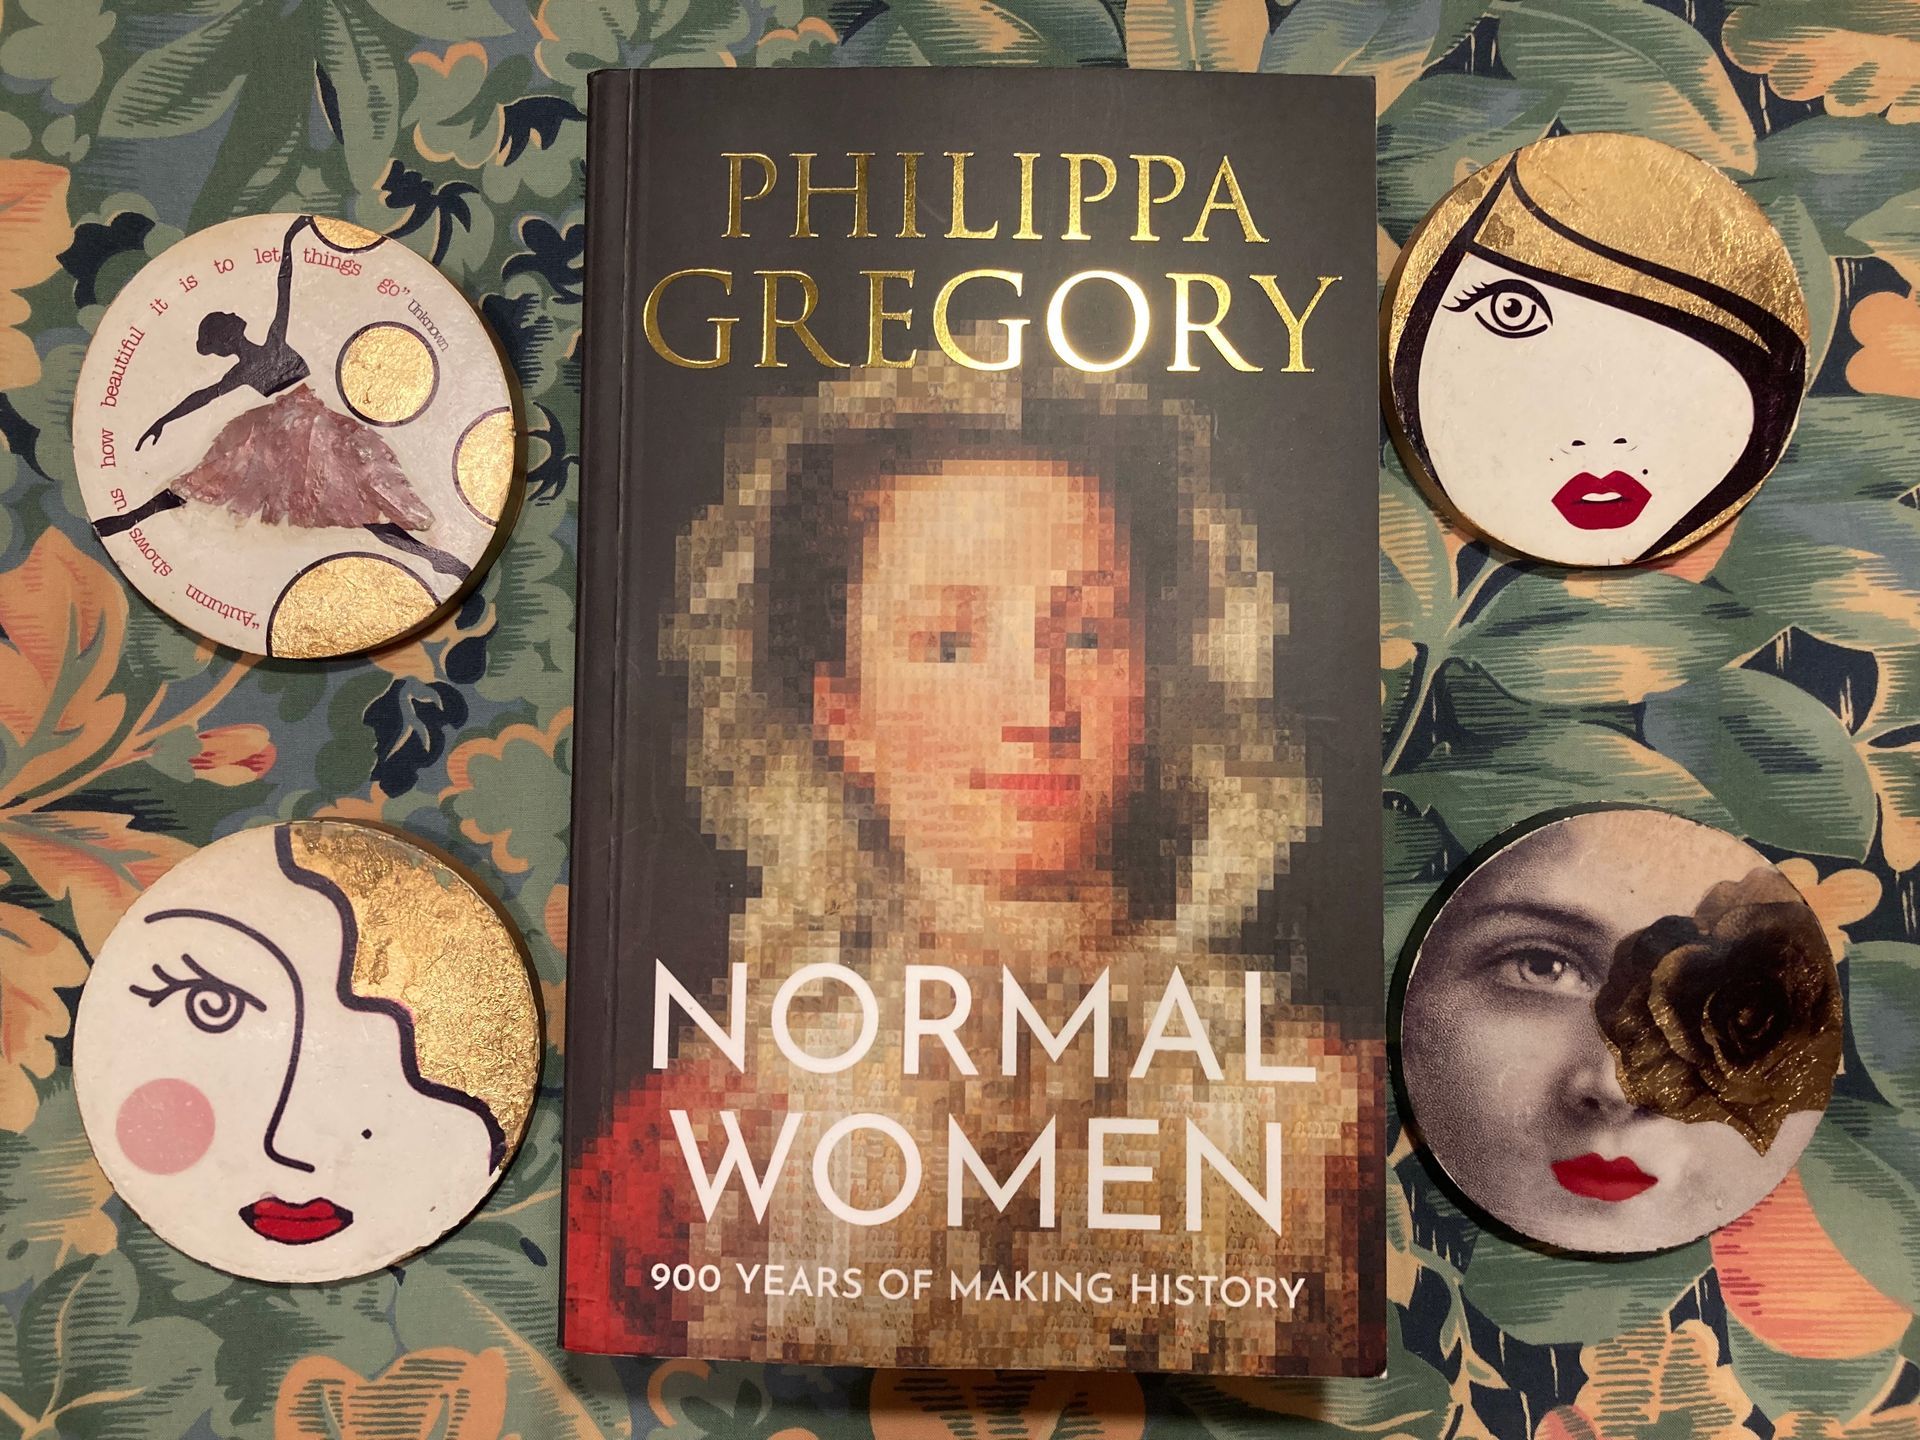 Book cover showing a pixelated image of an 18th century white woman.